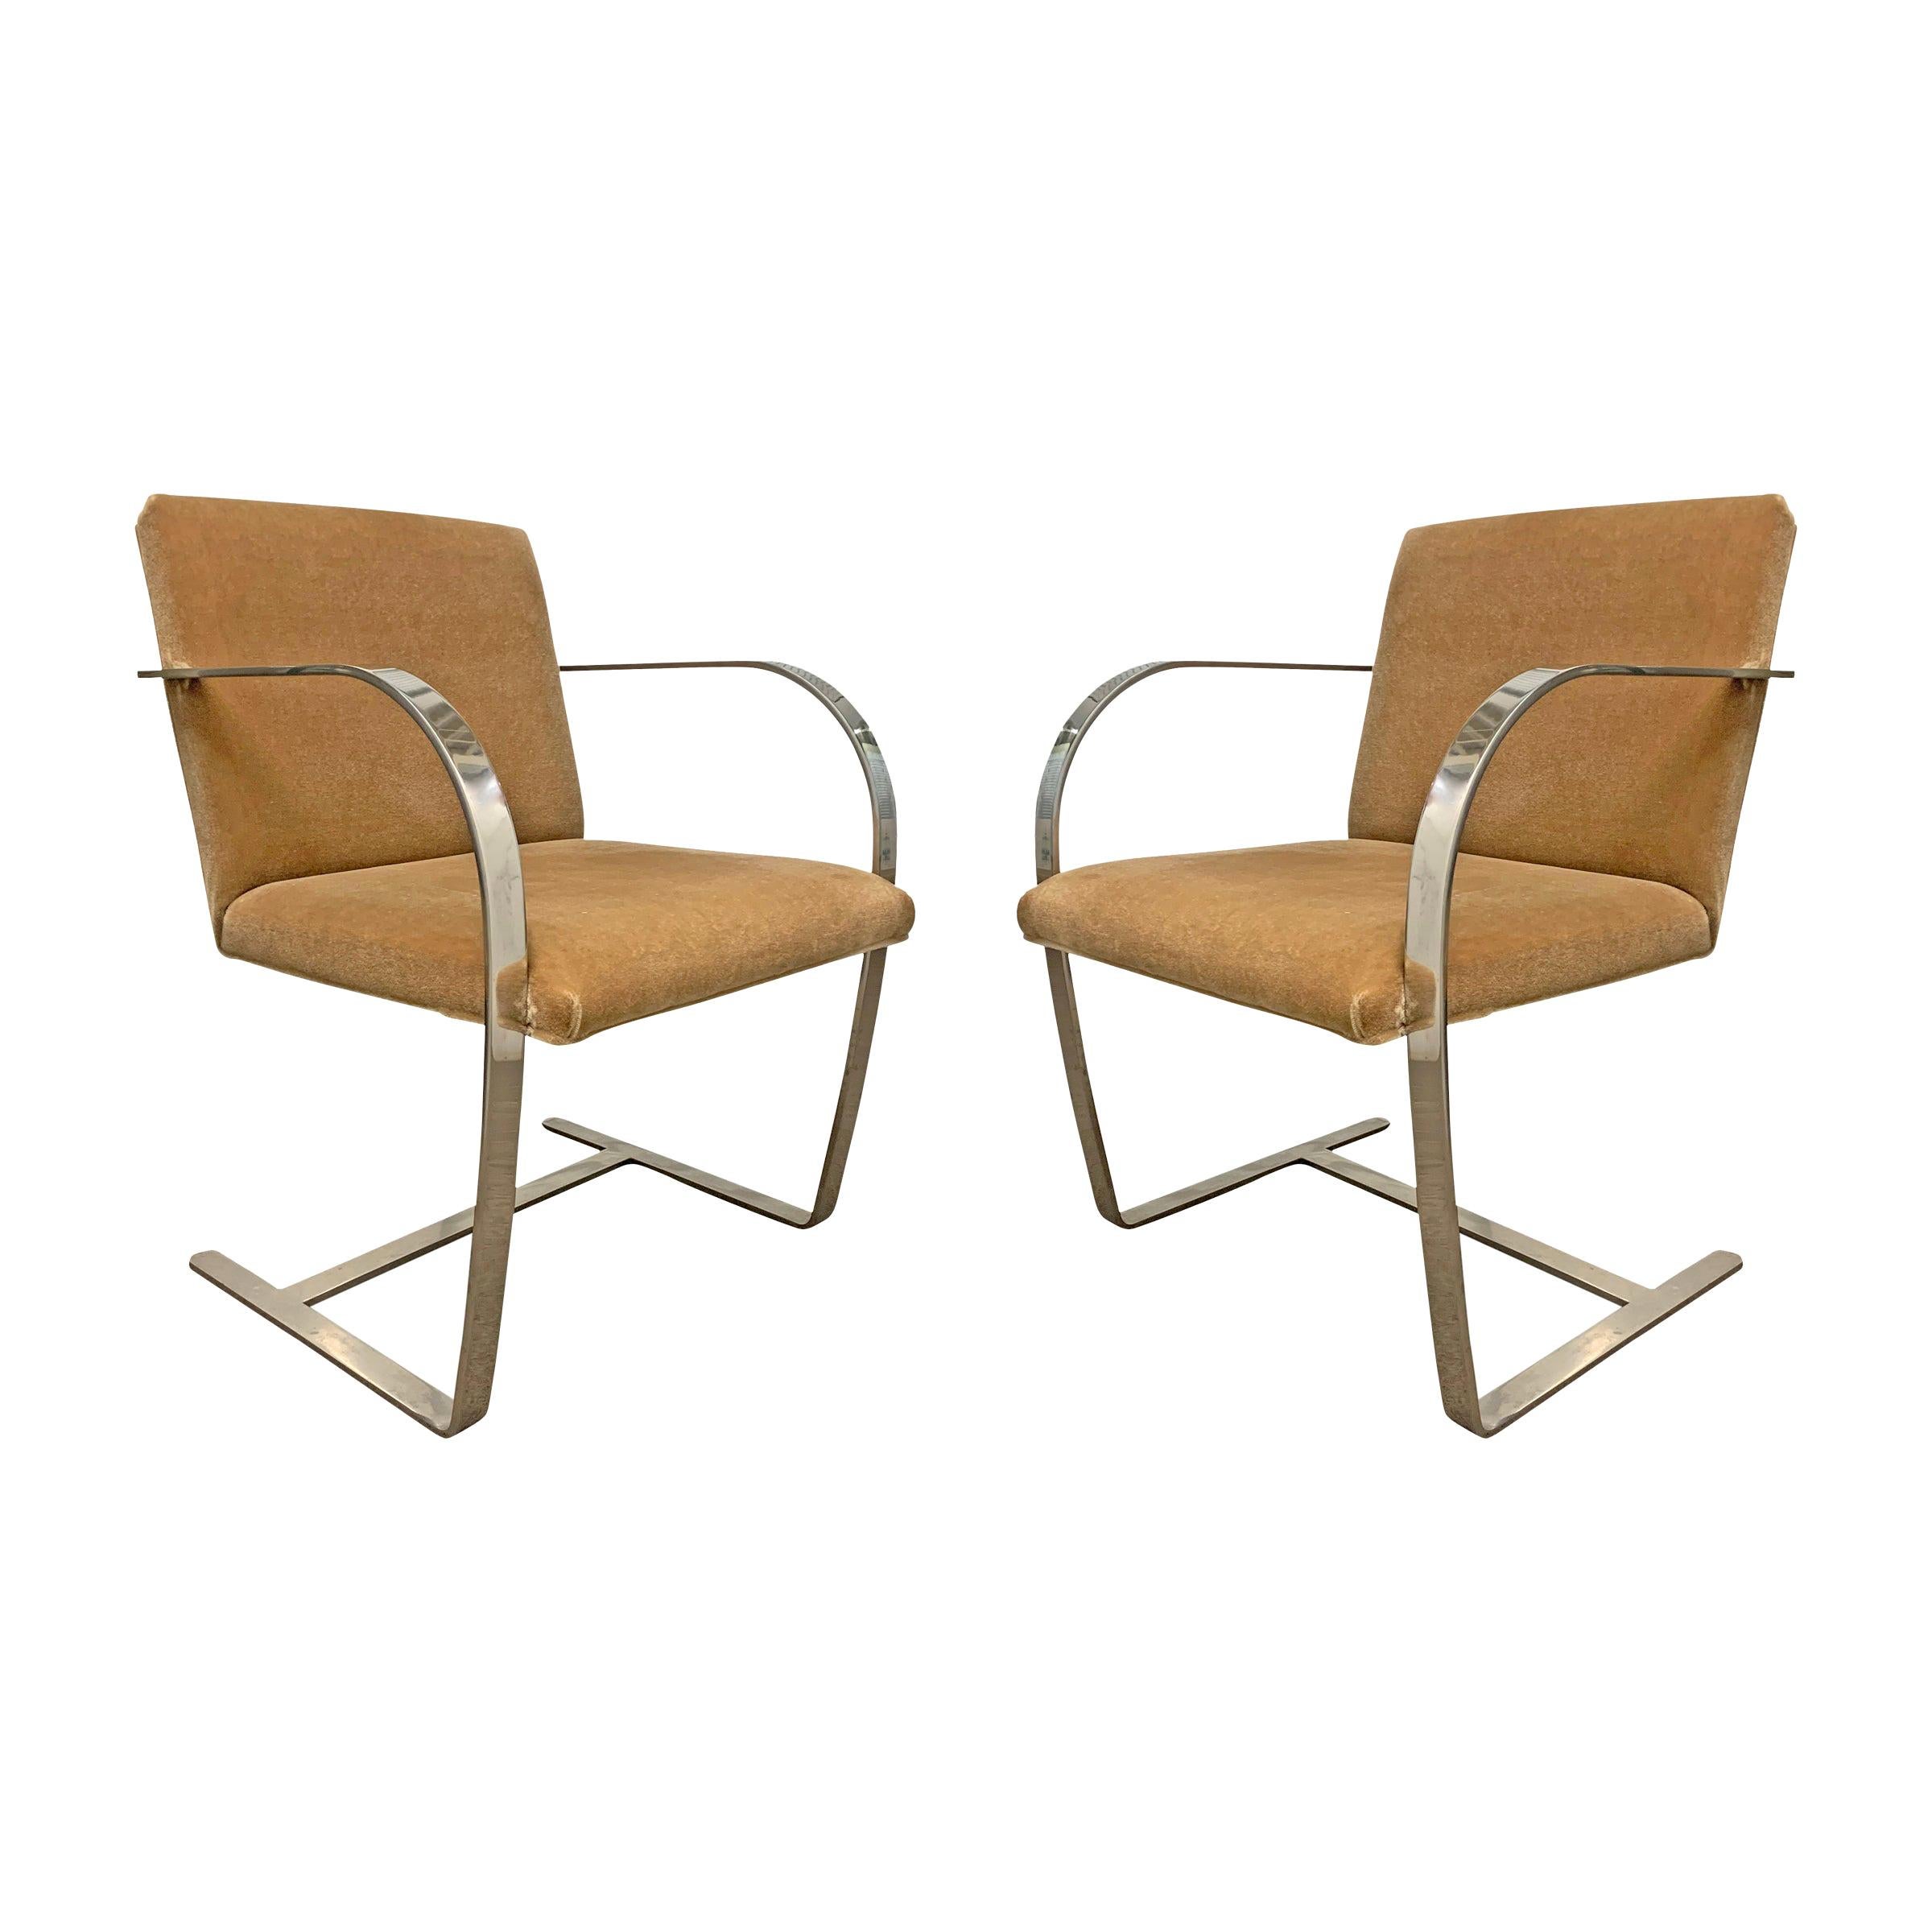 Pair of Brno Chairs by Mies van der Rohe